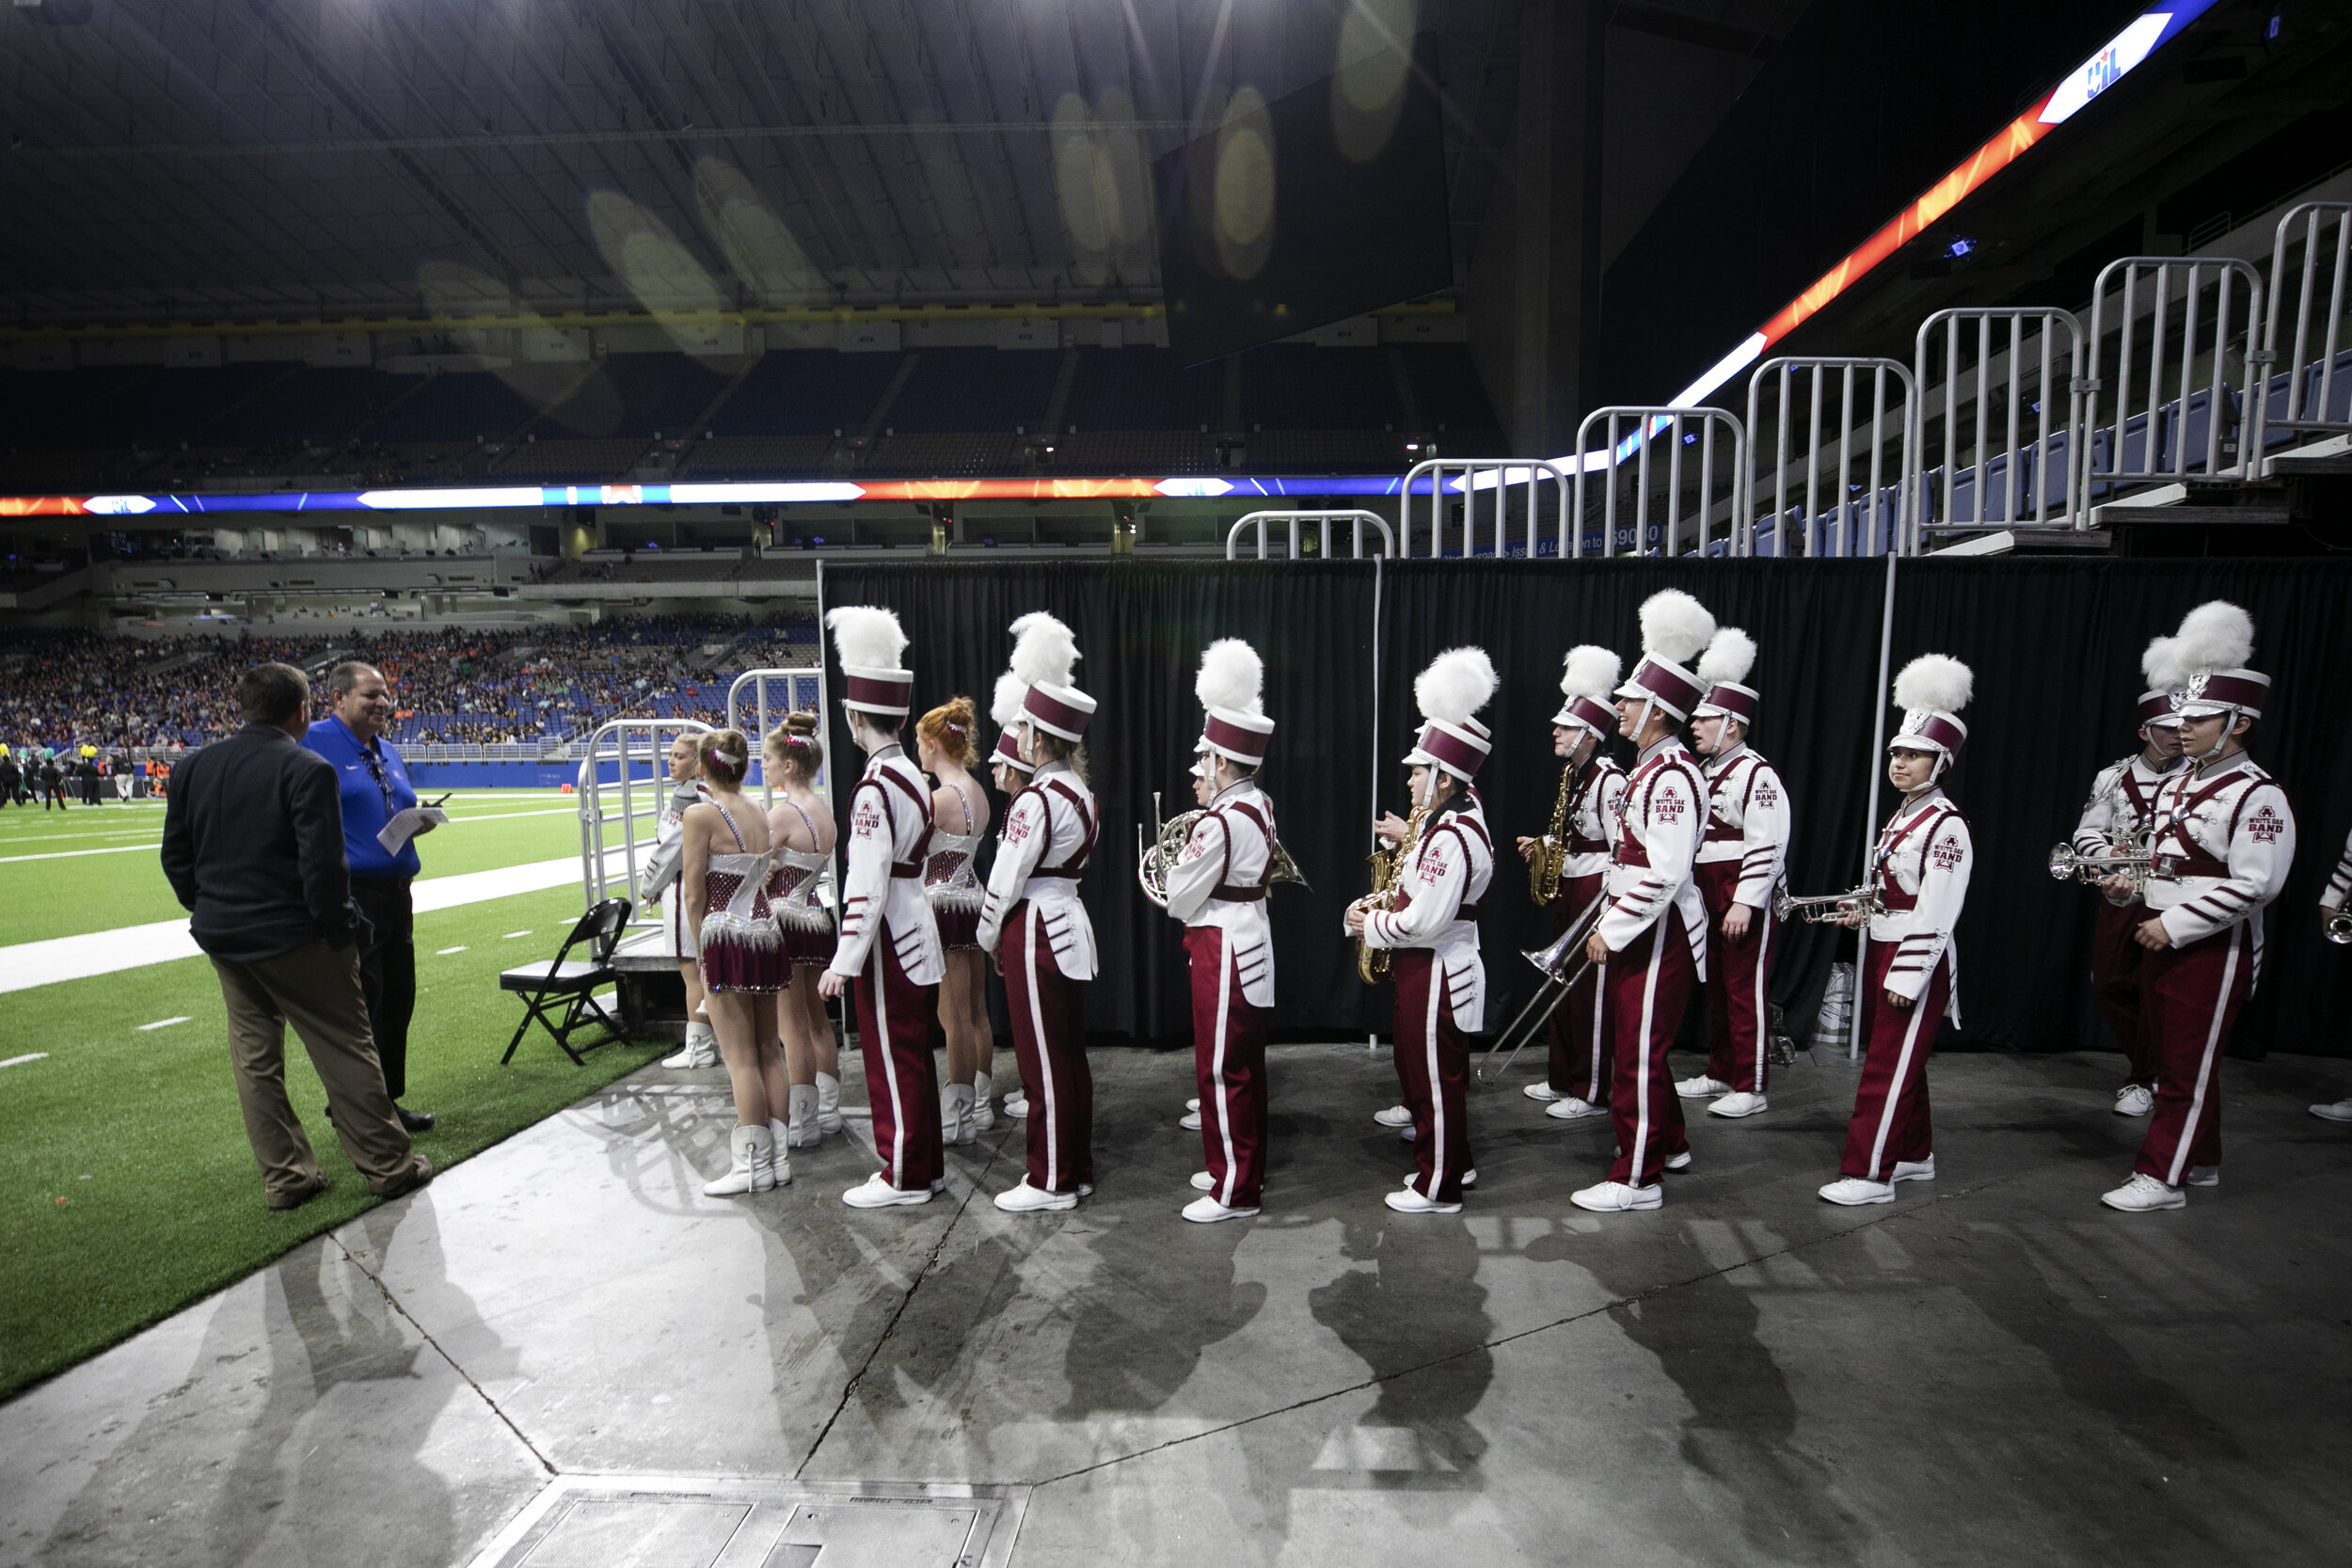  White Oak High School's marching band performed as the only military marching band at the competition. Military marching bands have diminished in popularity compared to corps marching bands – who take the field with props, themed choreography and el